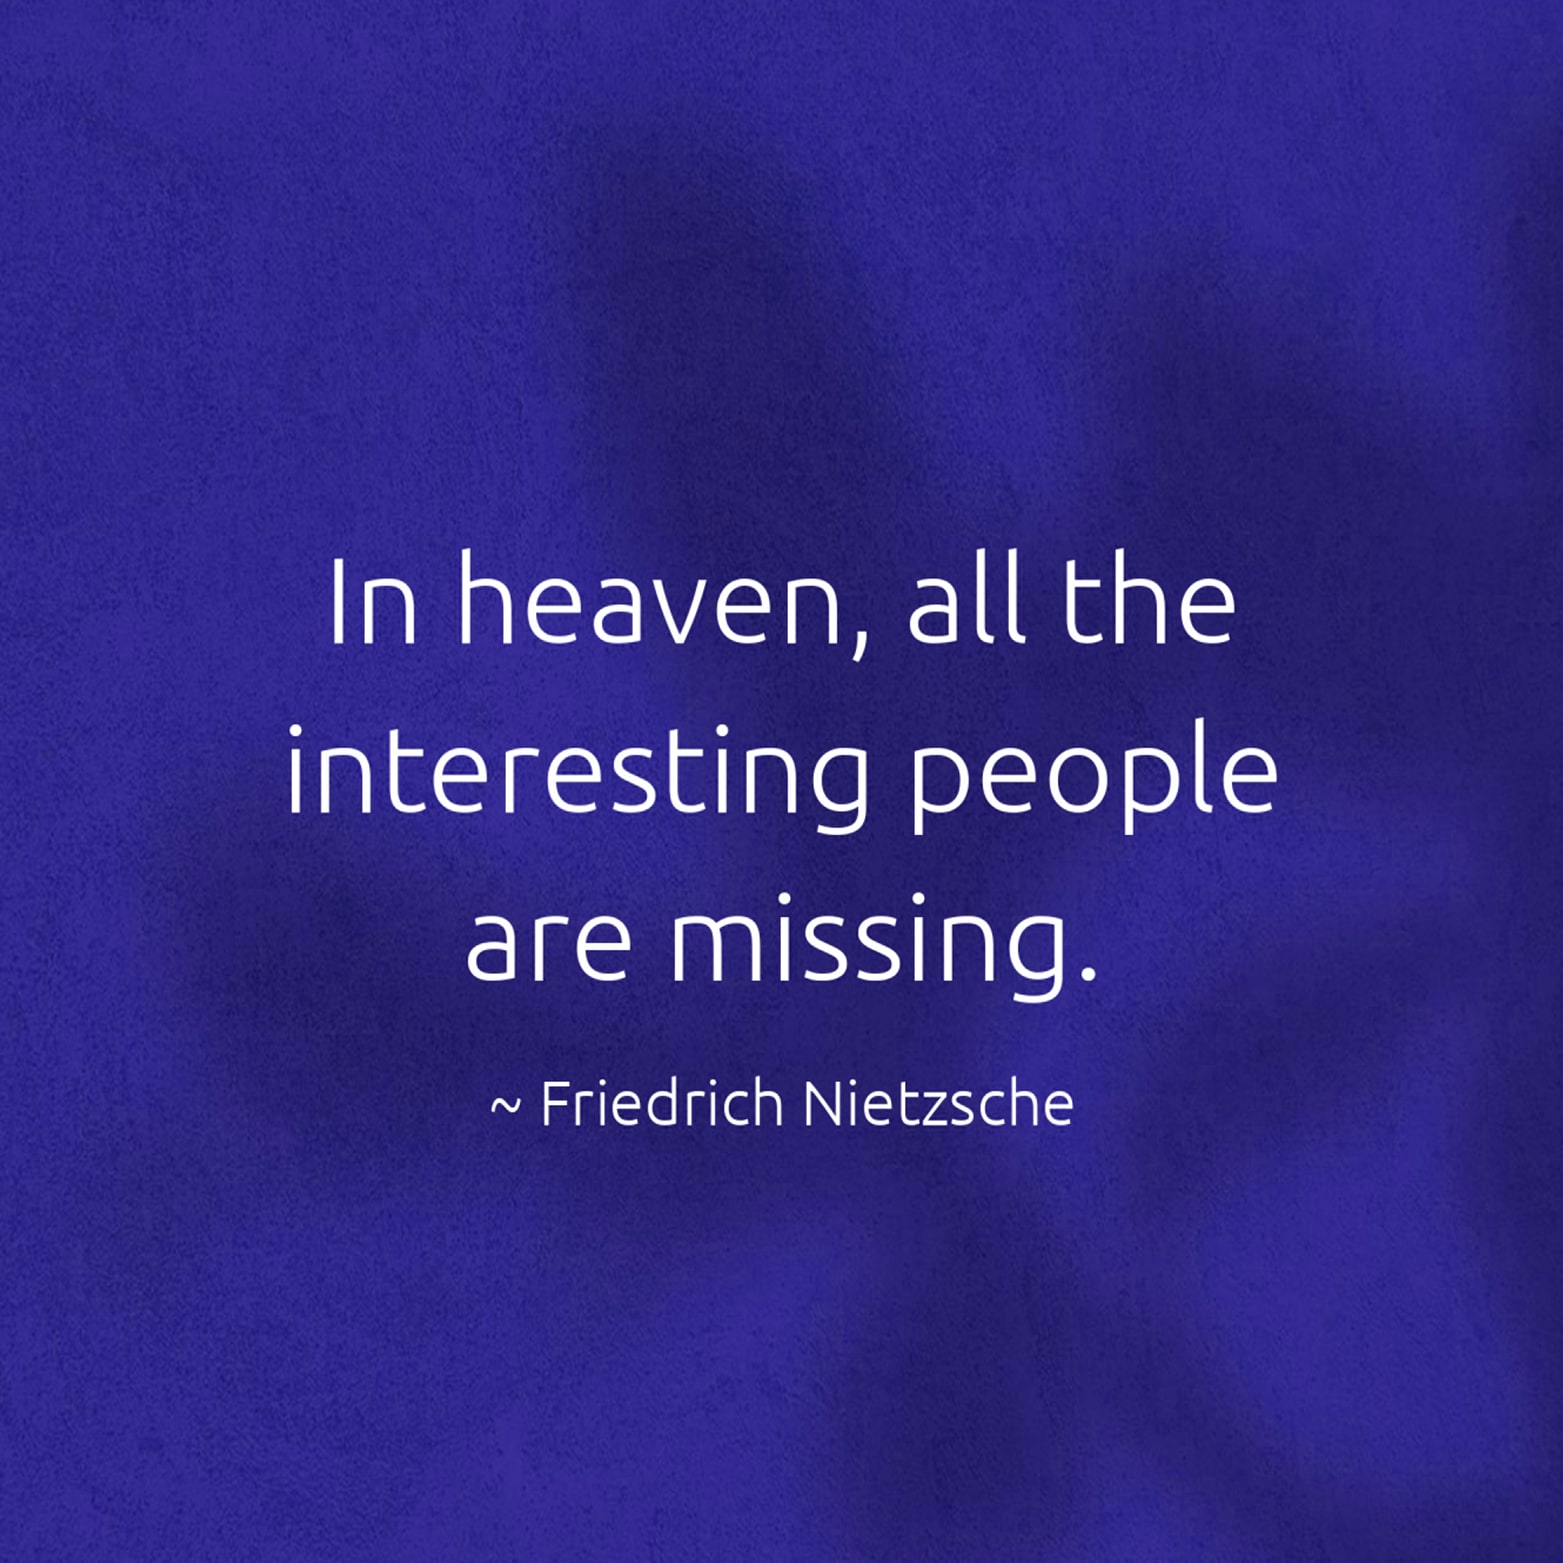 In heaven, all the interesting people are missing. - Friedrich Nietzsche